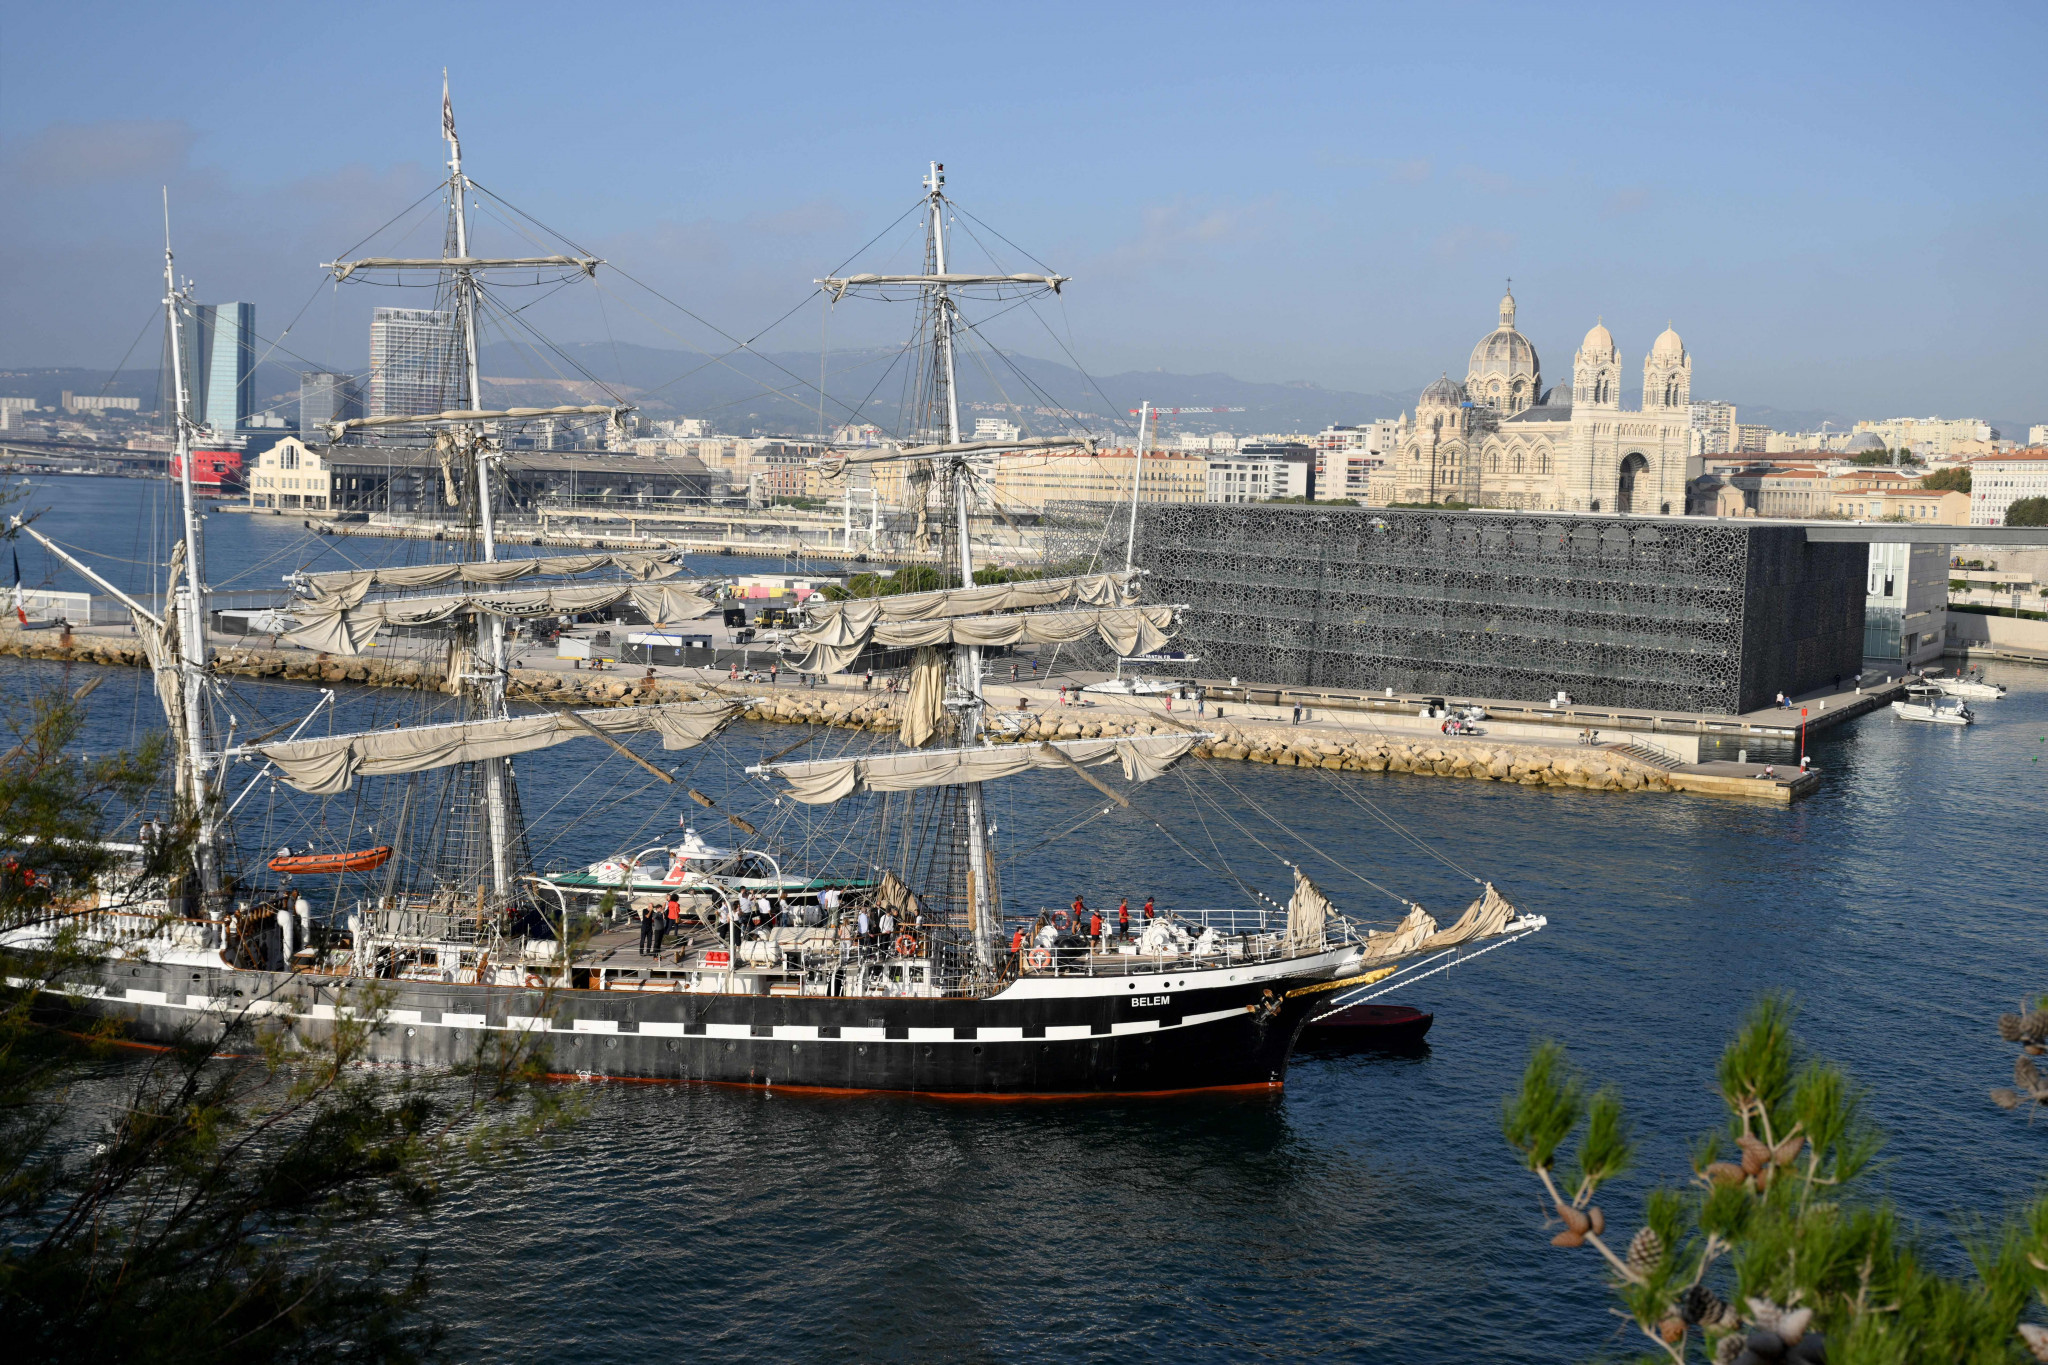 Mooring test conducted for sailing ship which will carry Paris 2024 Flame